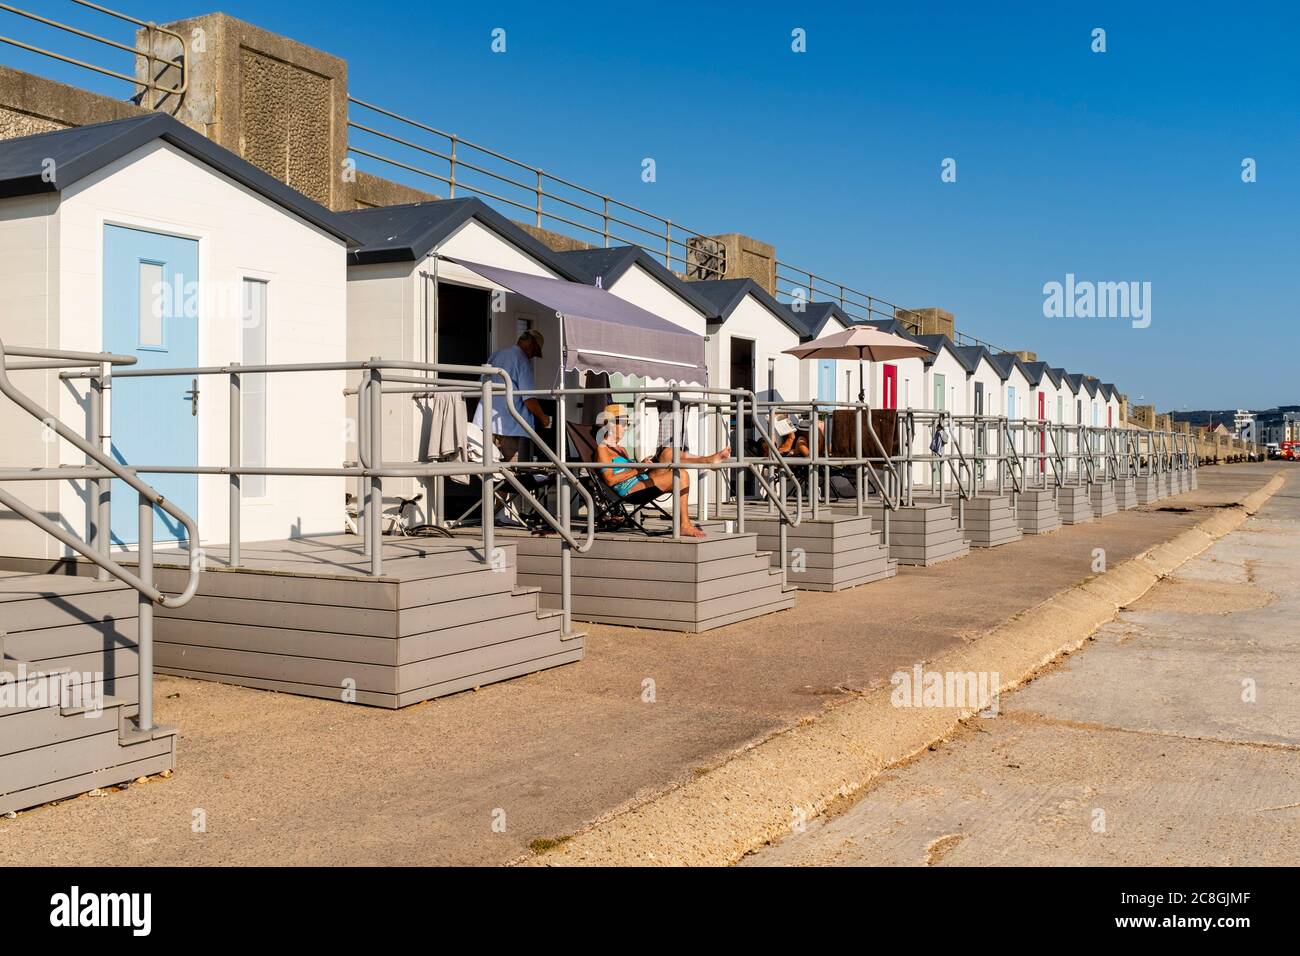 Colourful Beach Huts, Seaford, East Sussex, UK Stock Photo